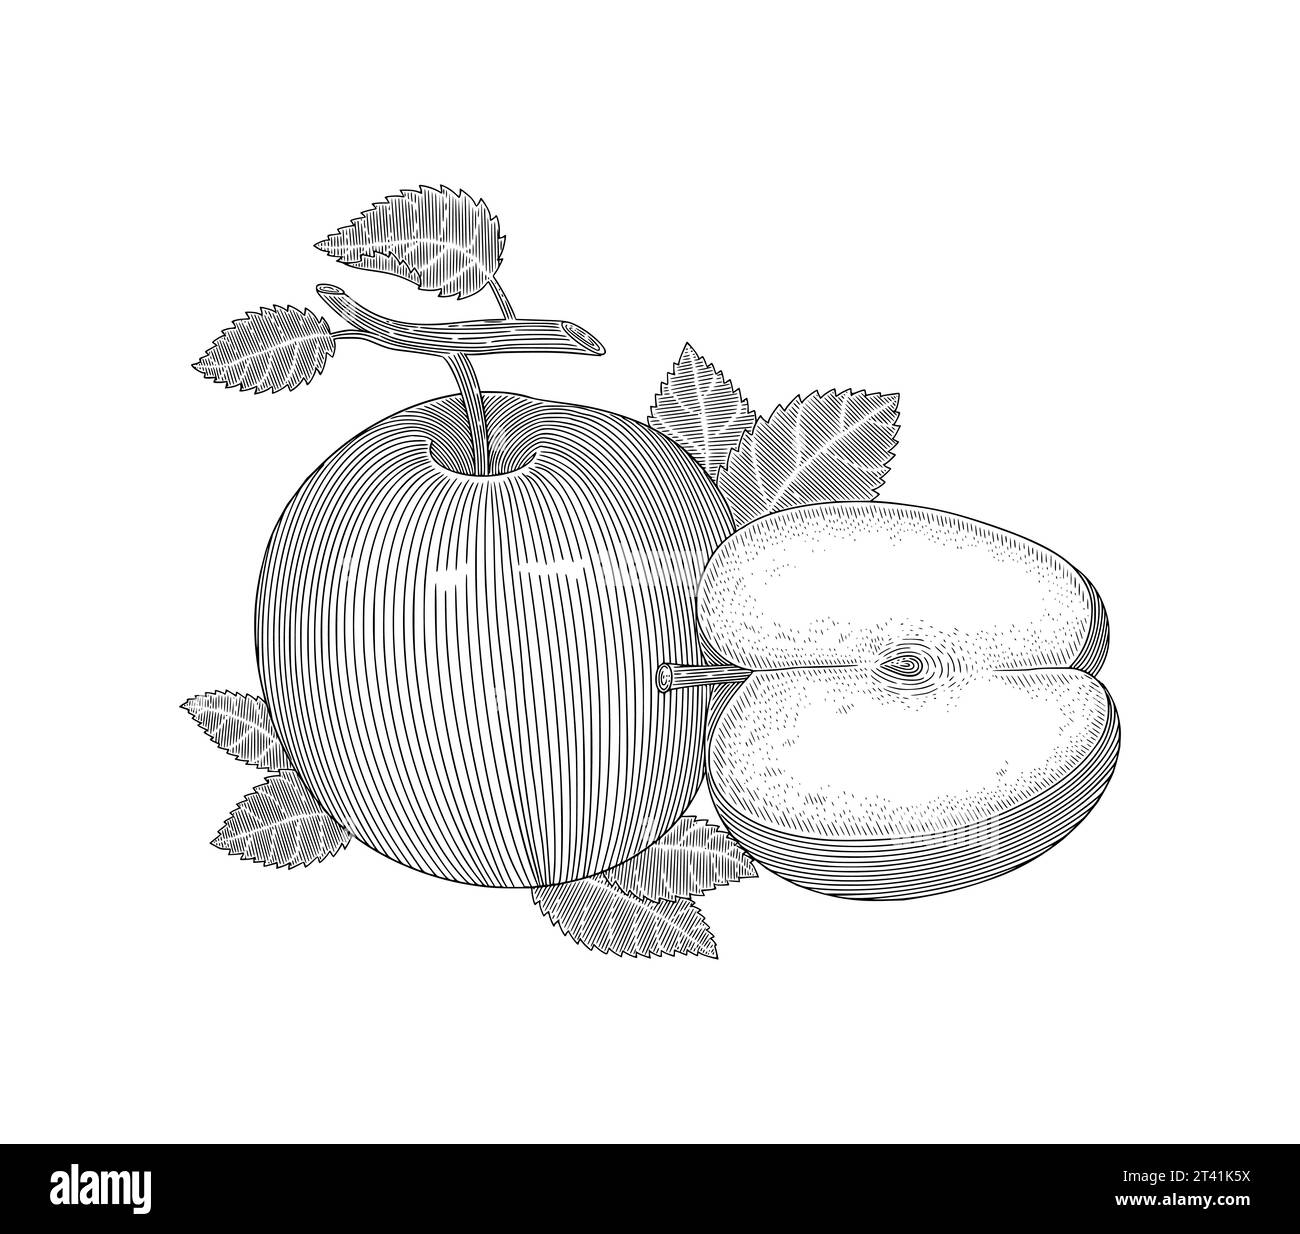 apple fruit with leafs and half slice, Vintage engraving drawing style illustration Stock Vector